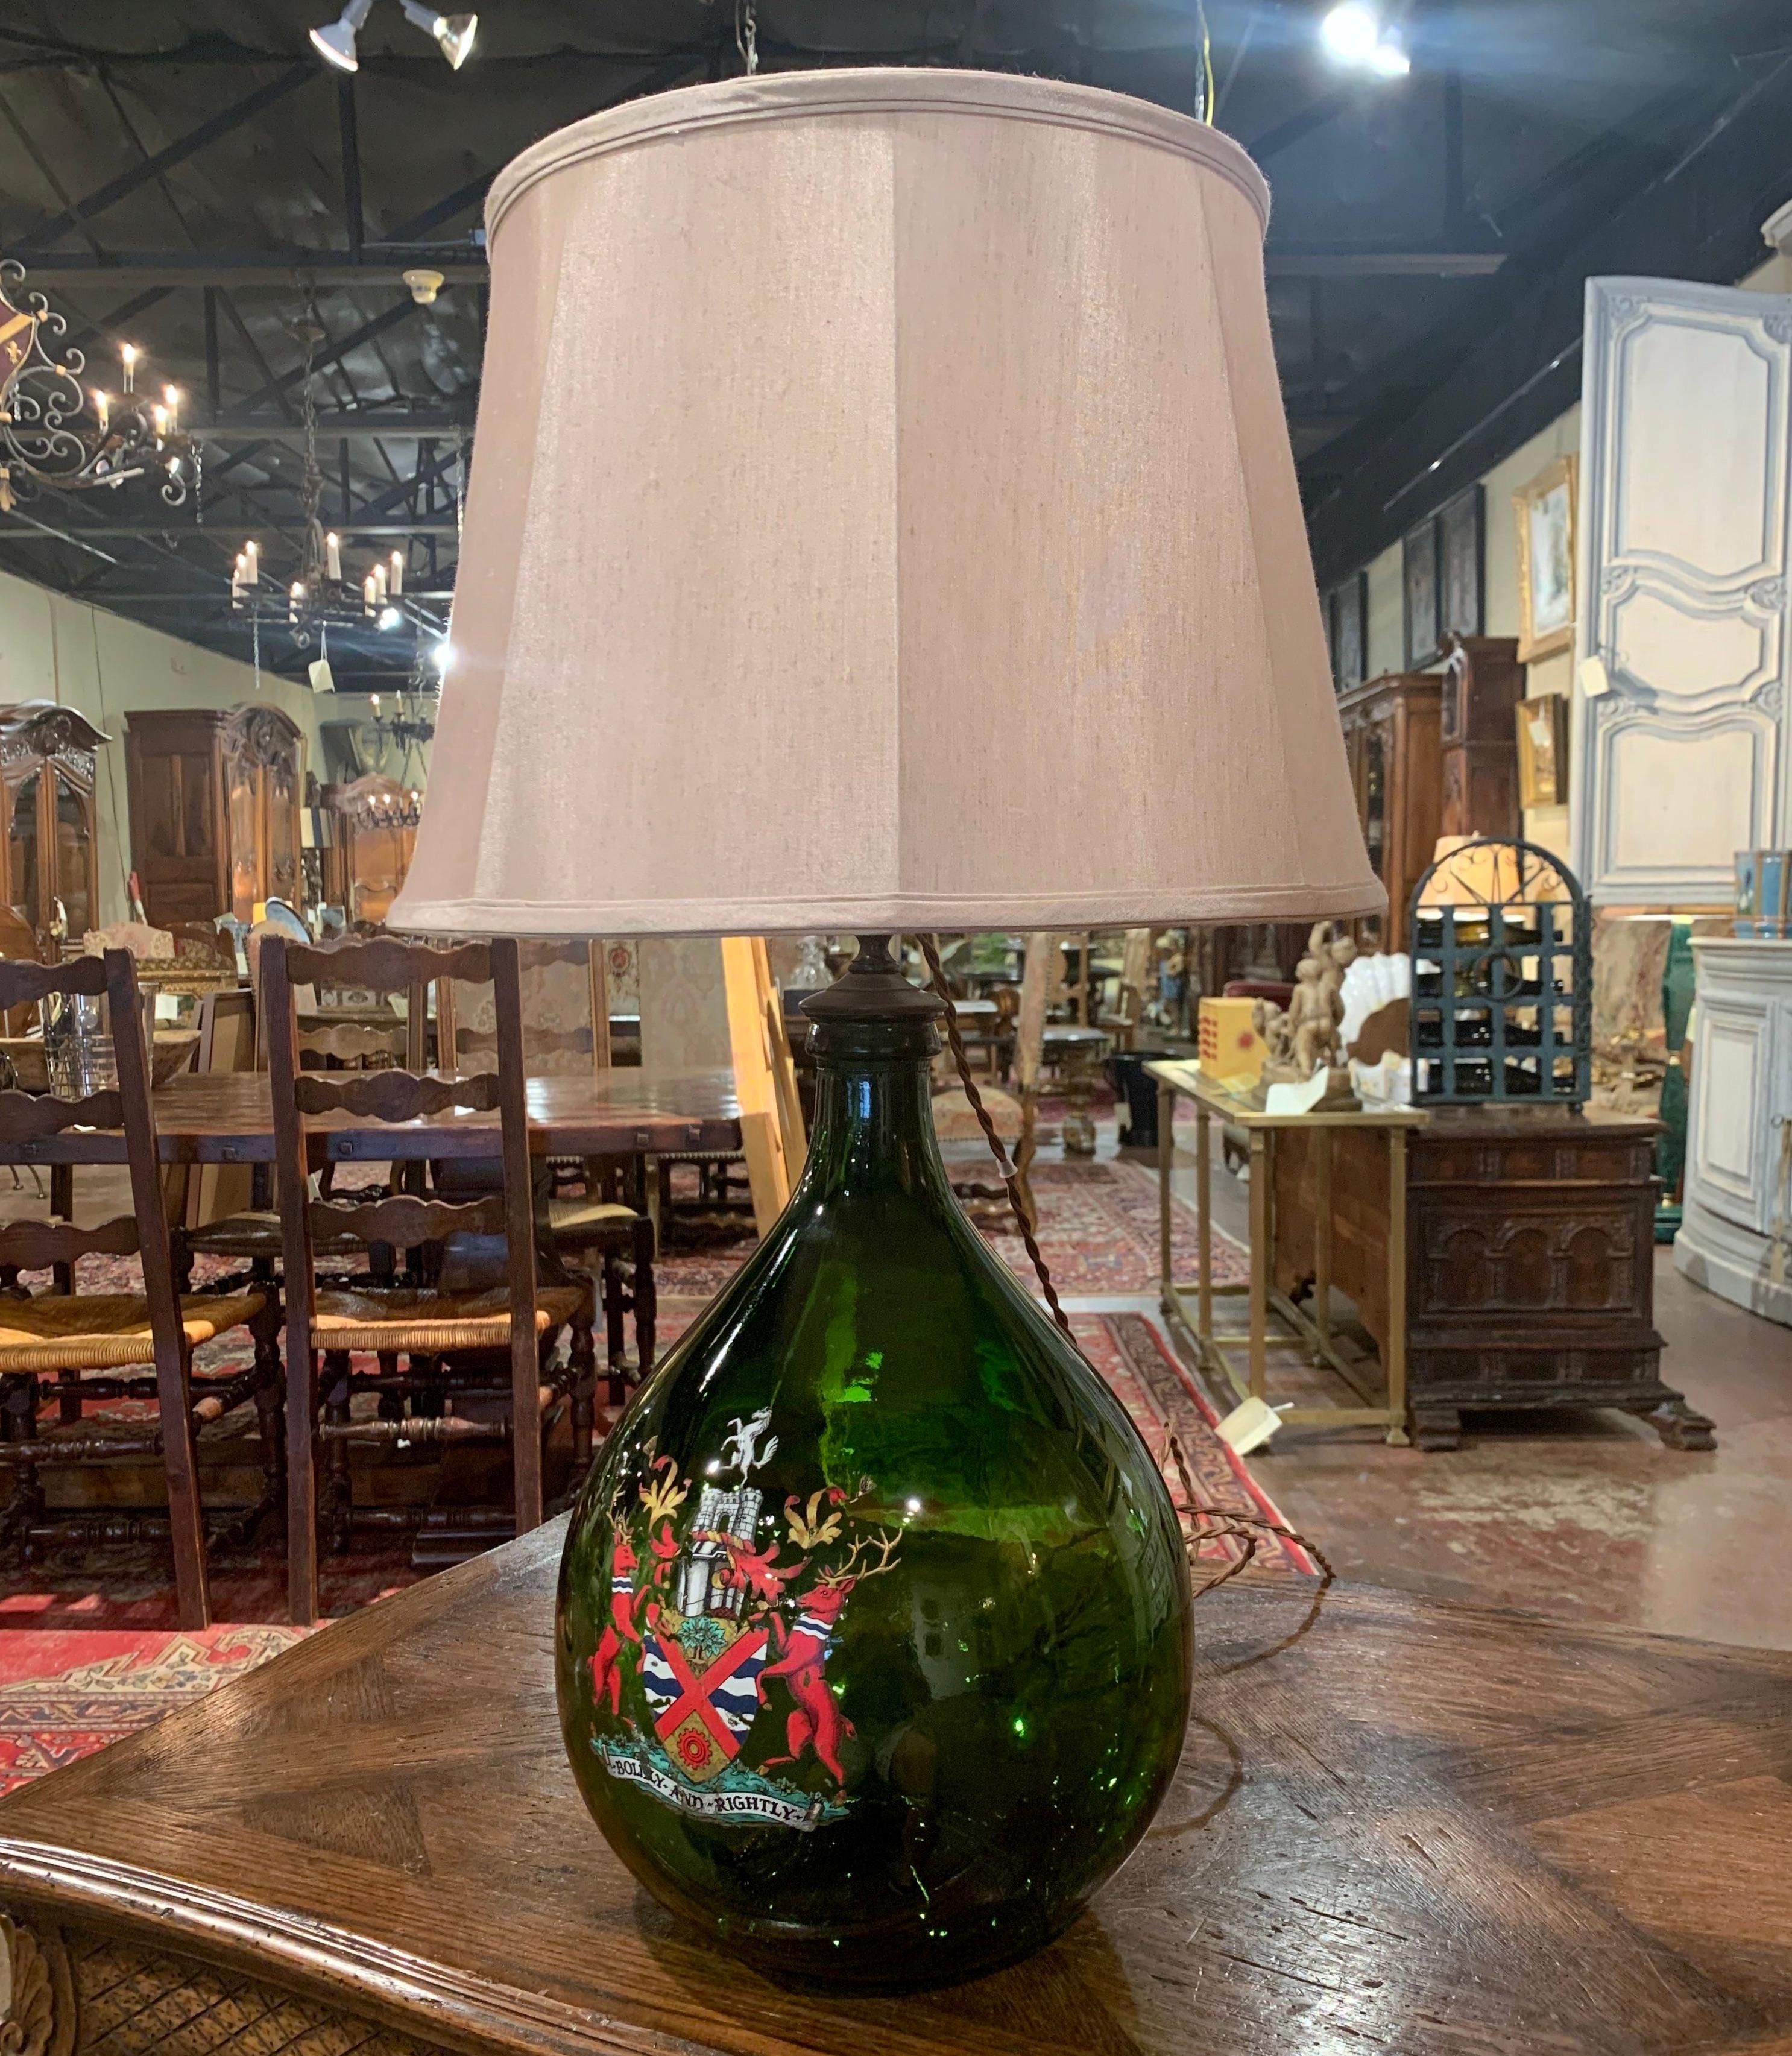 Decorate a wine cellar or a wet bar with this Classic table lamp! Hand blown in France, this glass bottle with green shade features a hand painted crest embellished with Royal motifs, and was converted into an elegant fixture with new wiring. The